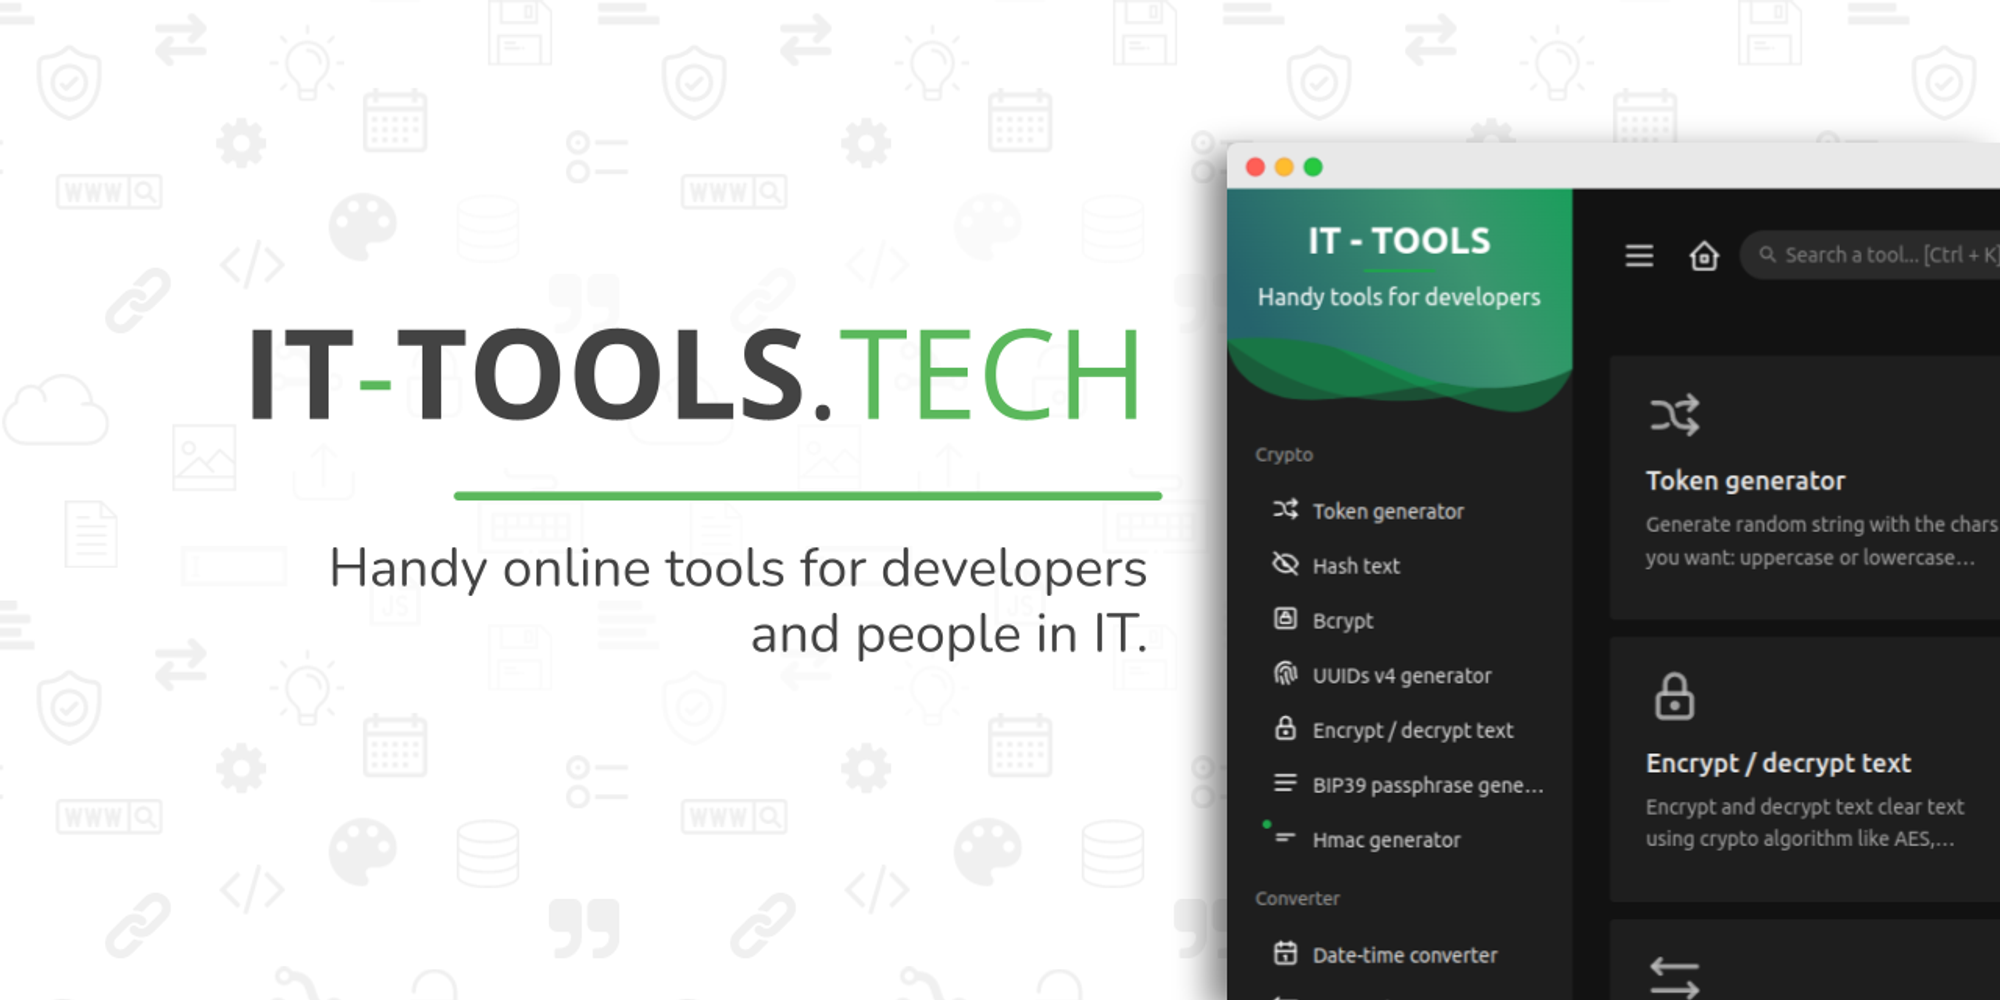 IT Tools - Handy online tools for developers